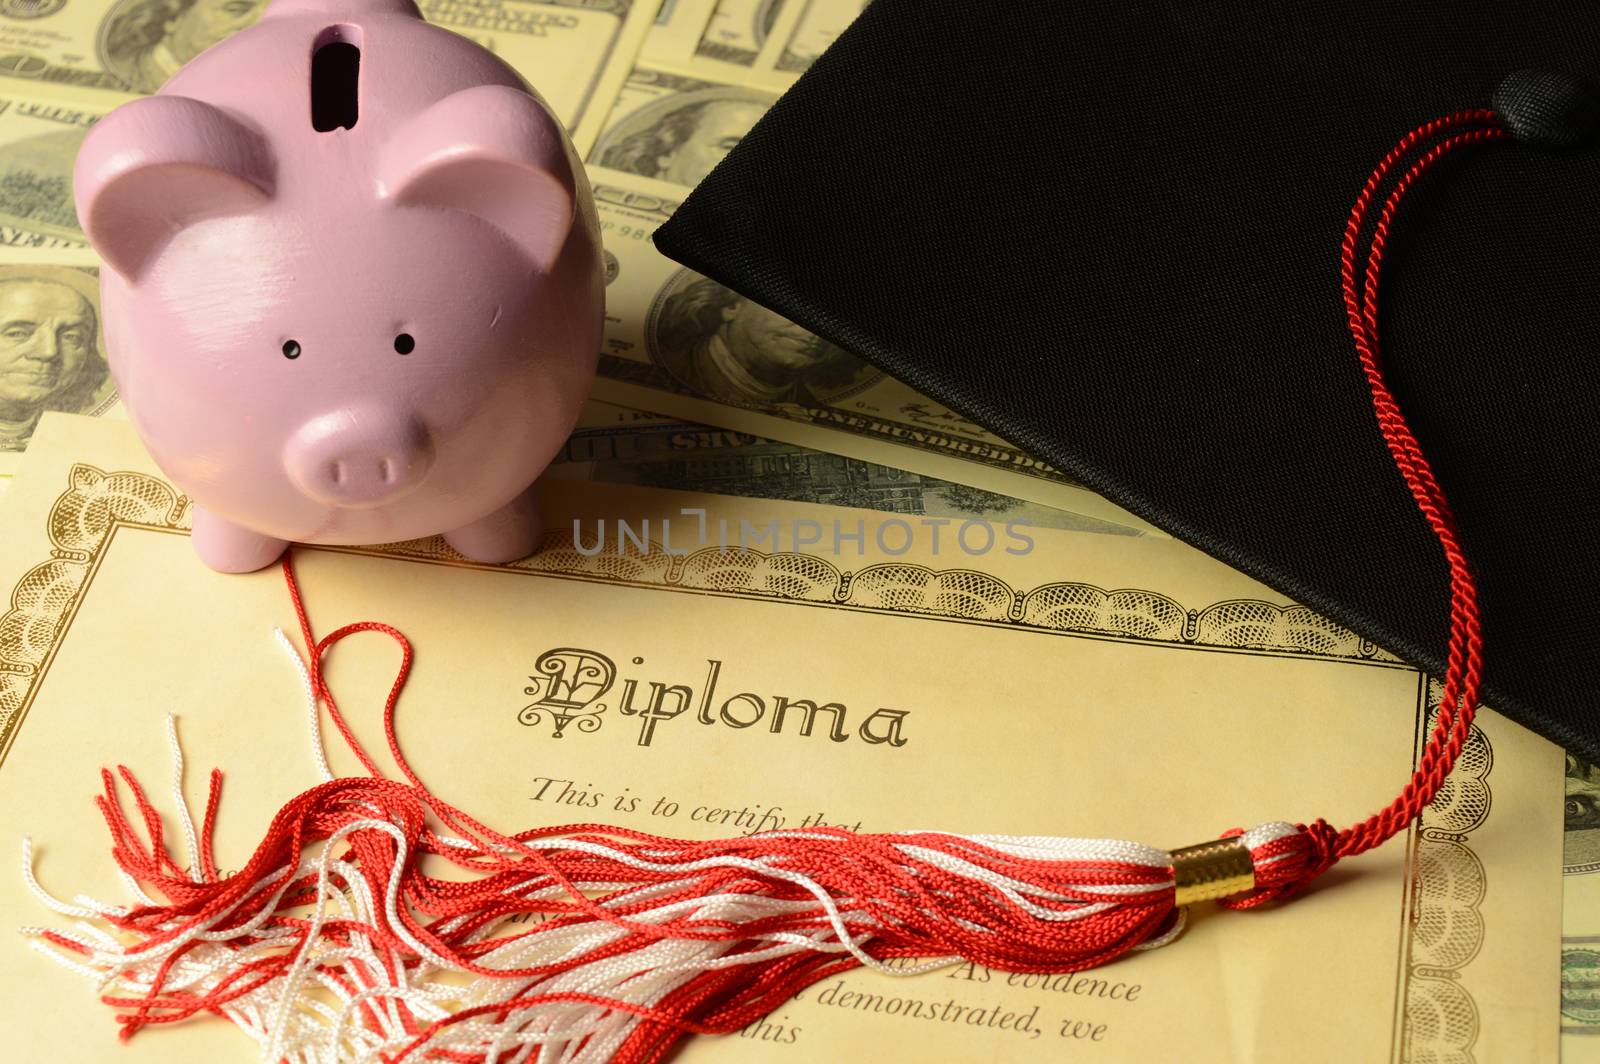 A conceptual image based on the financial aspects involved with obtaining a diploma certificate of graduation.